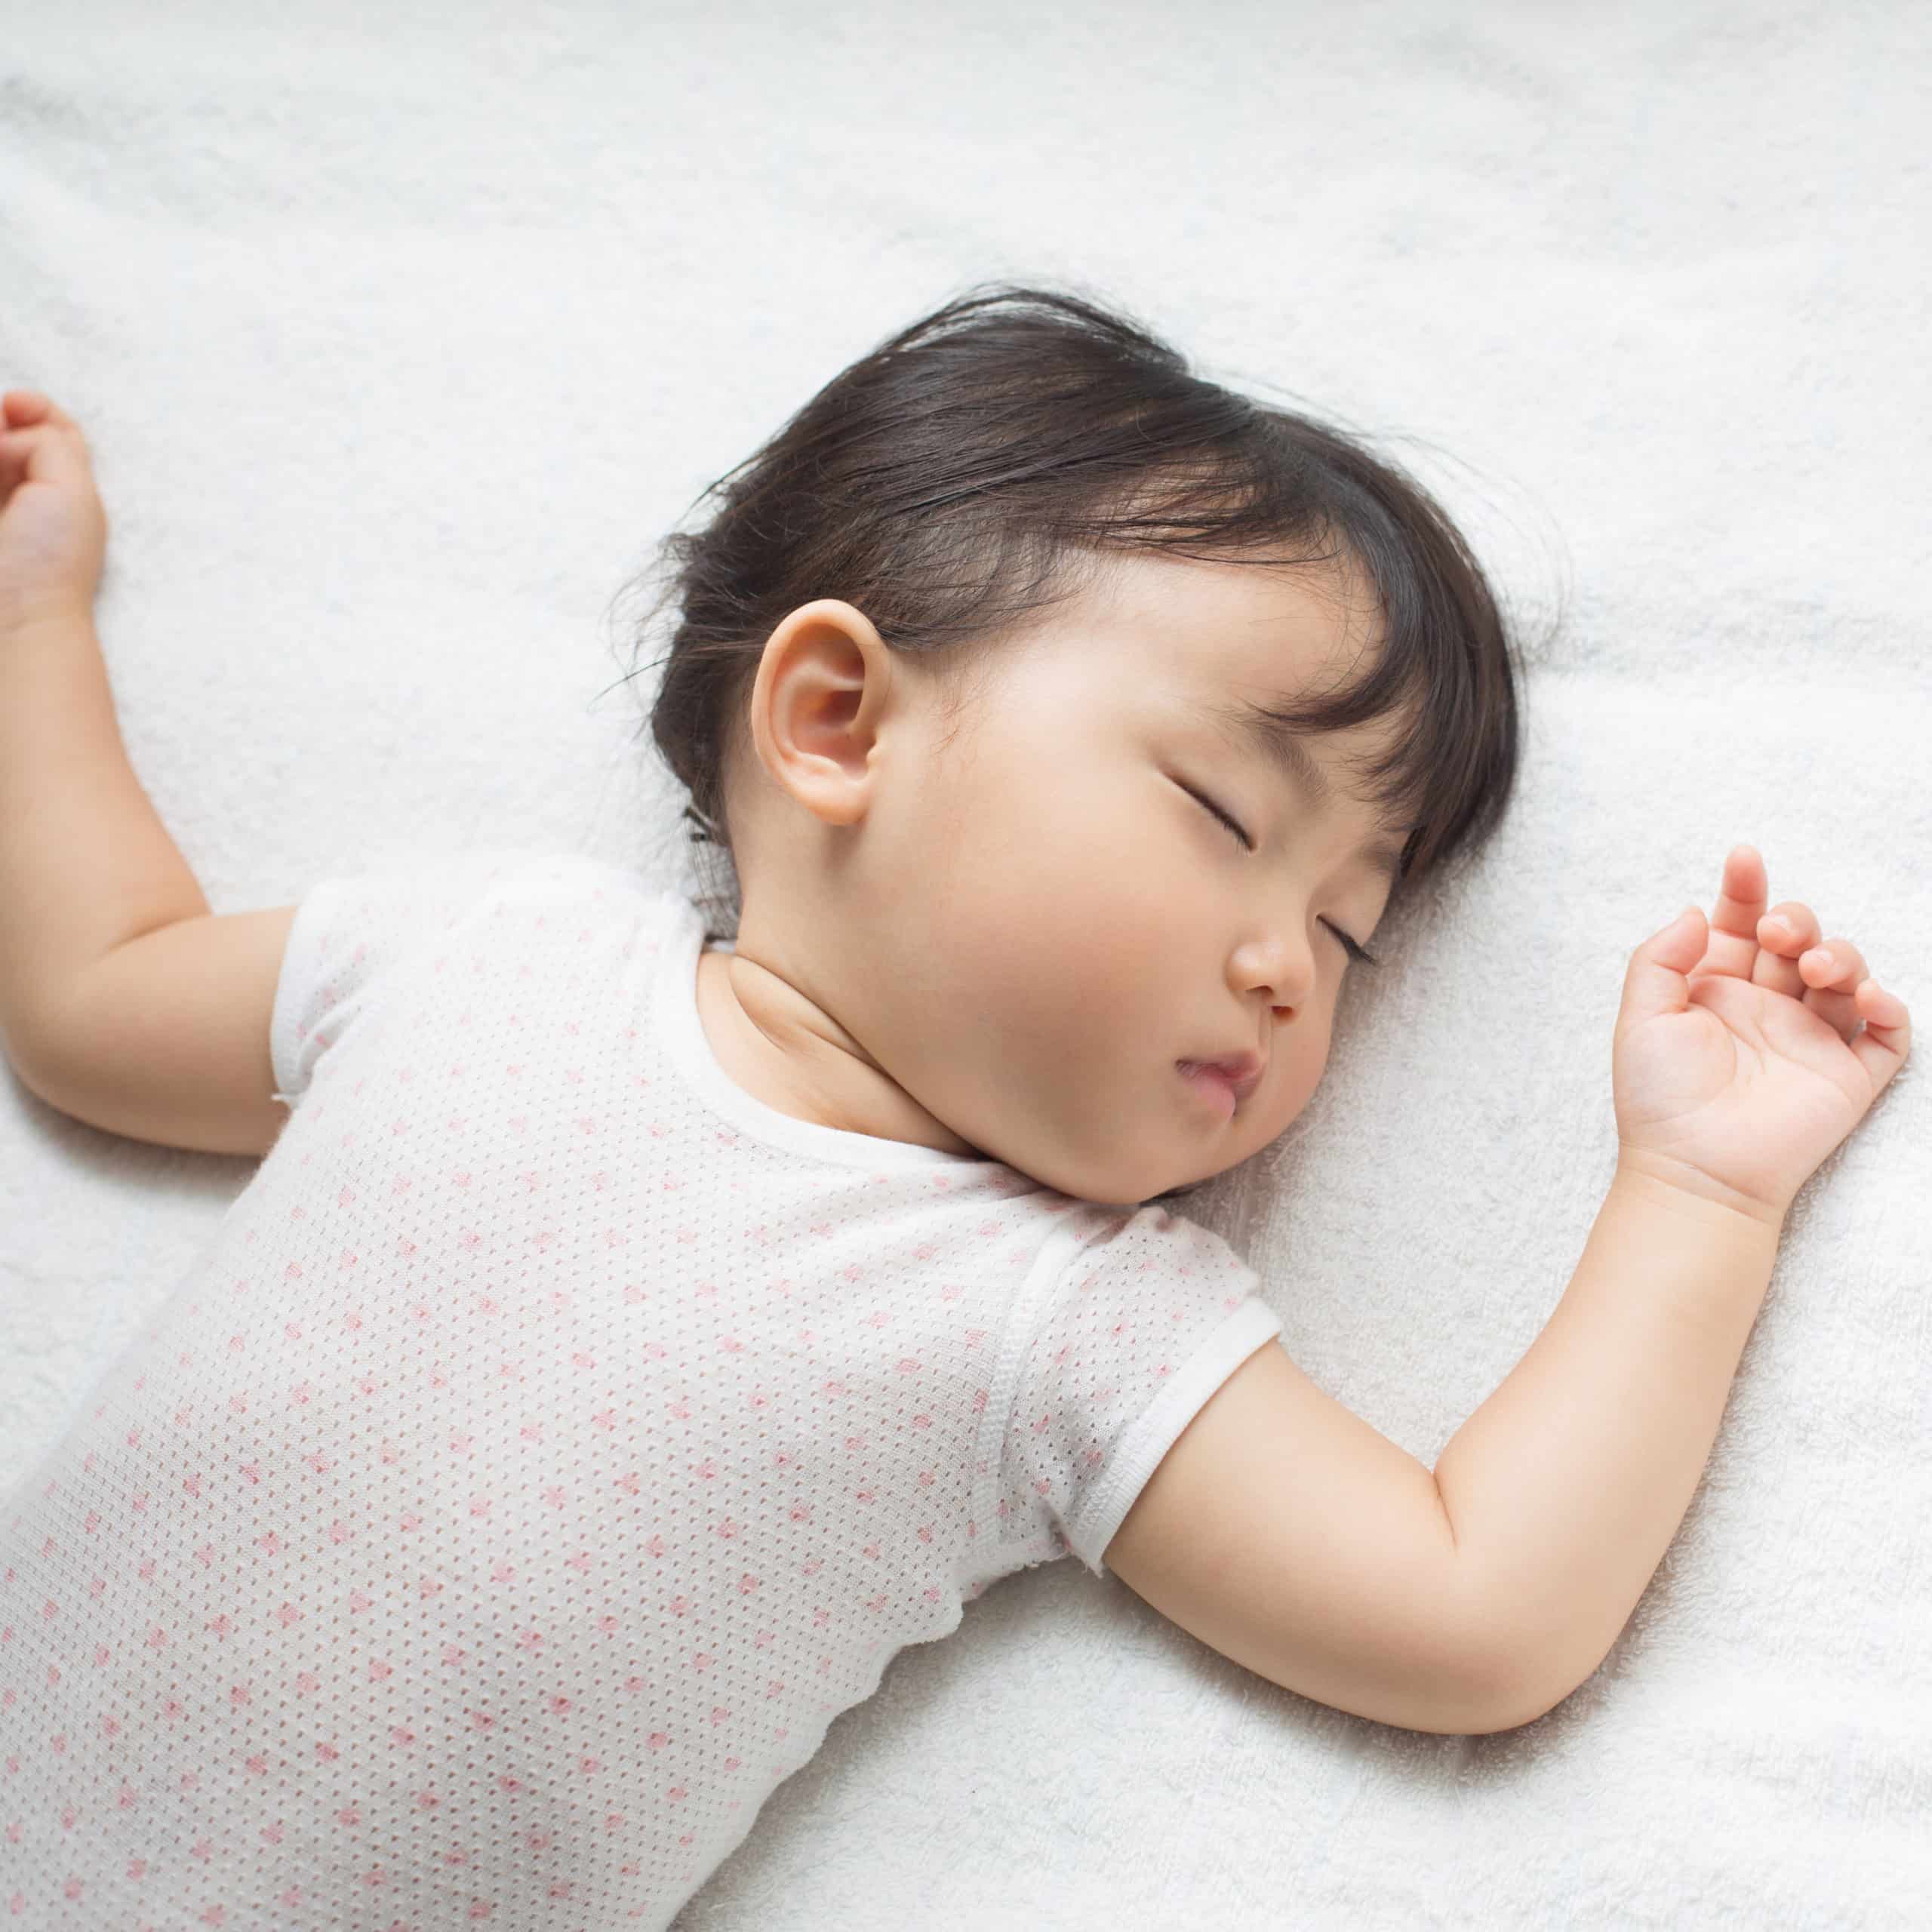 Important points about sleep training for babies